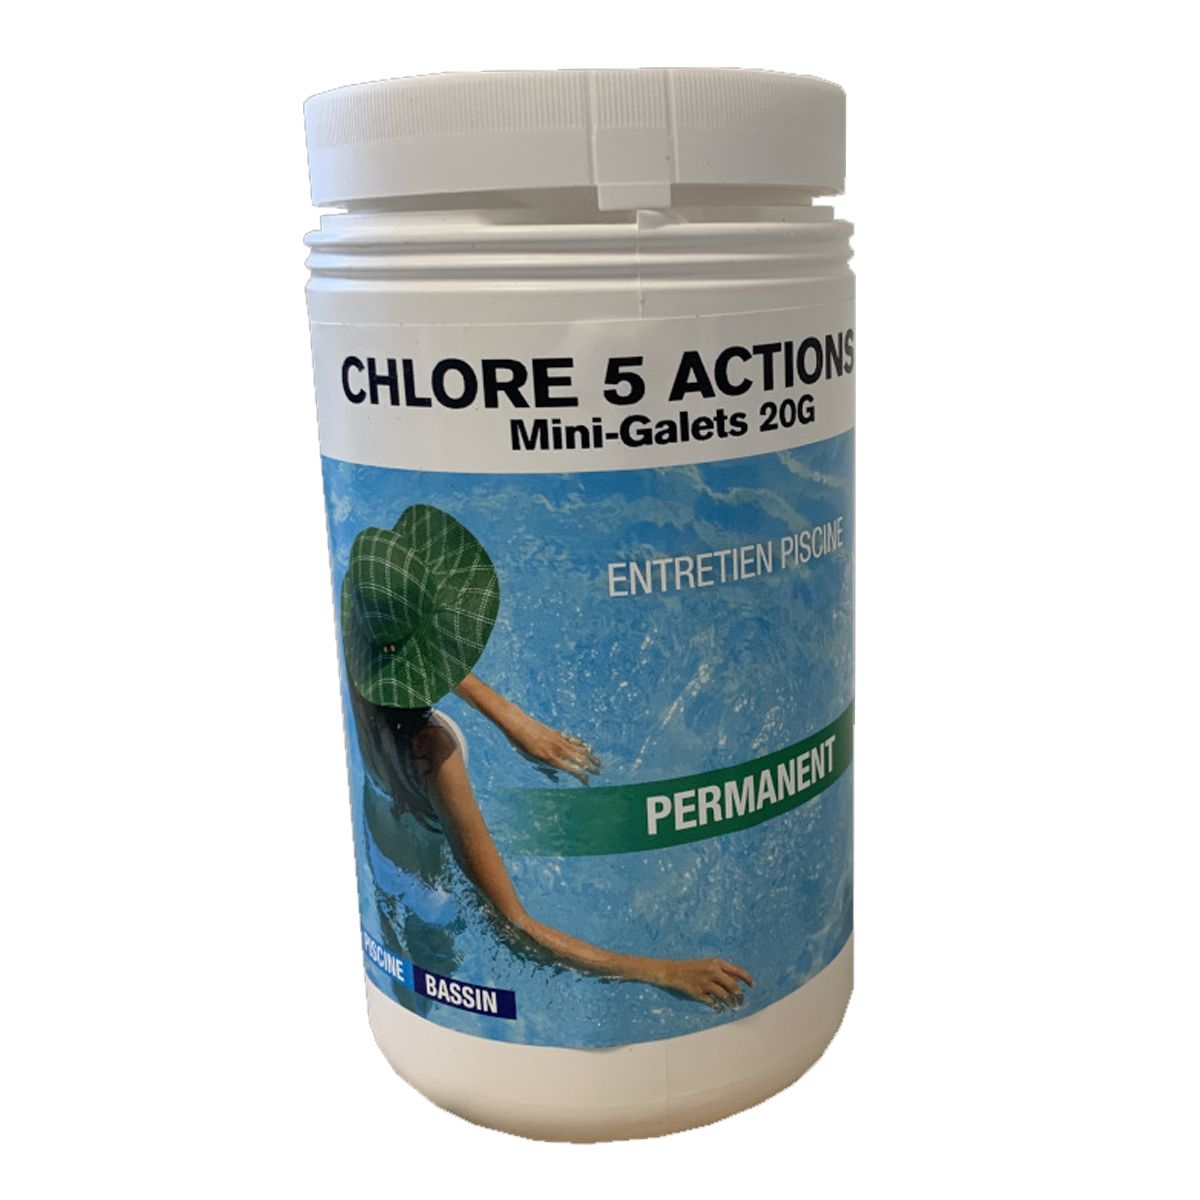 Nmp Chlore 5 actions mini-galets 20 gr 1kg - 36041bcm